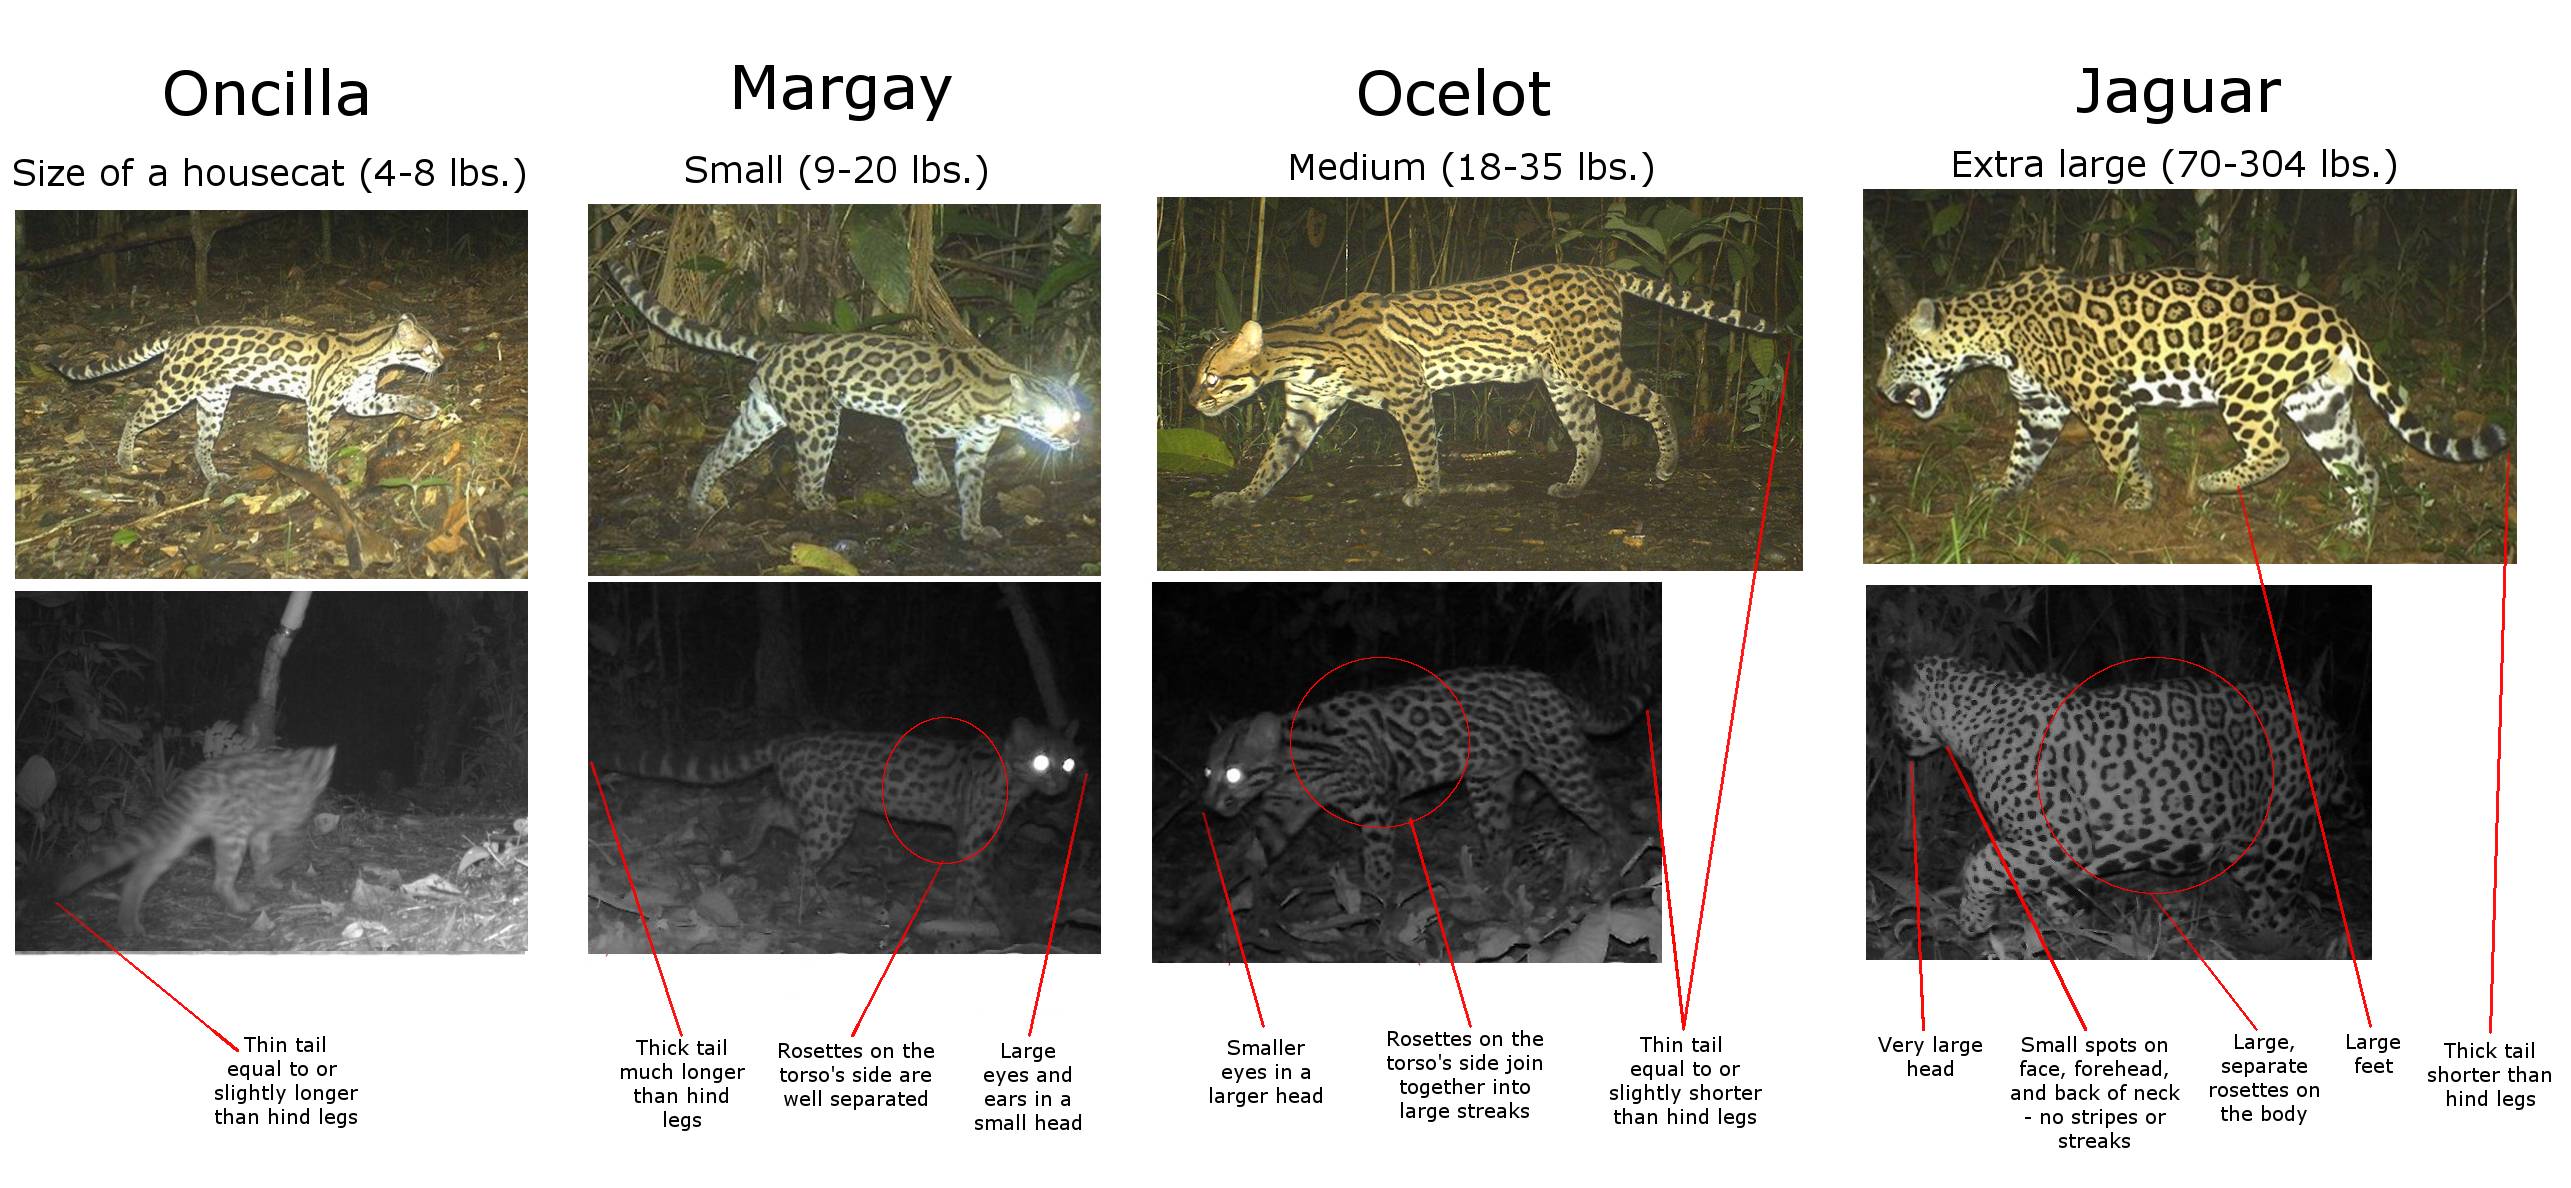 What is the difference between male and female ocelots?